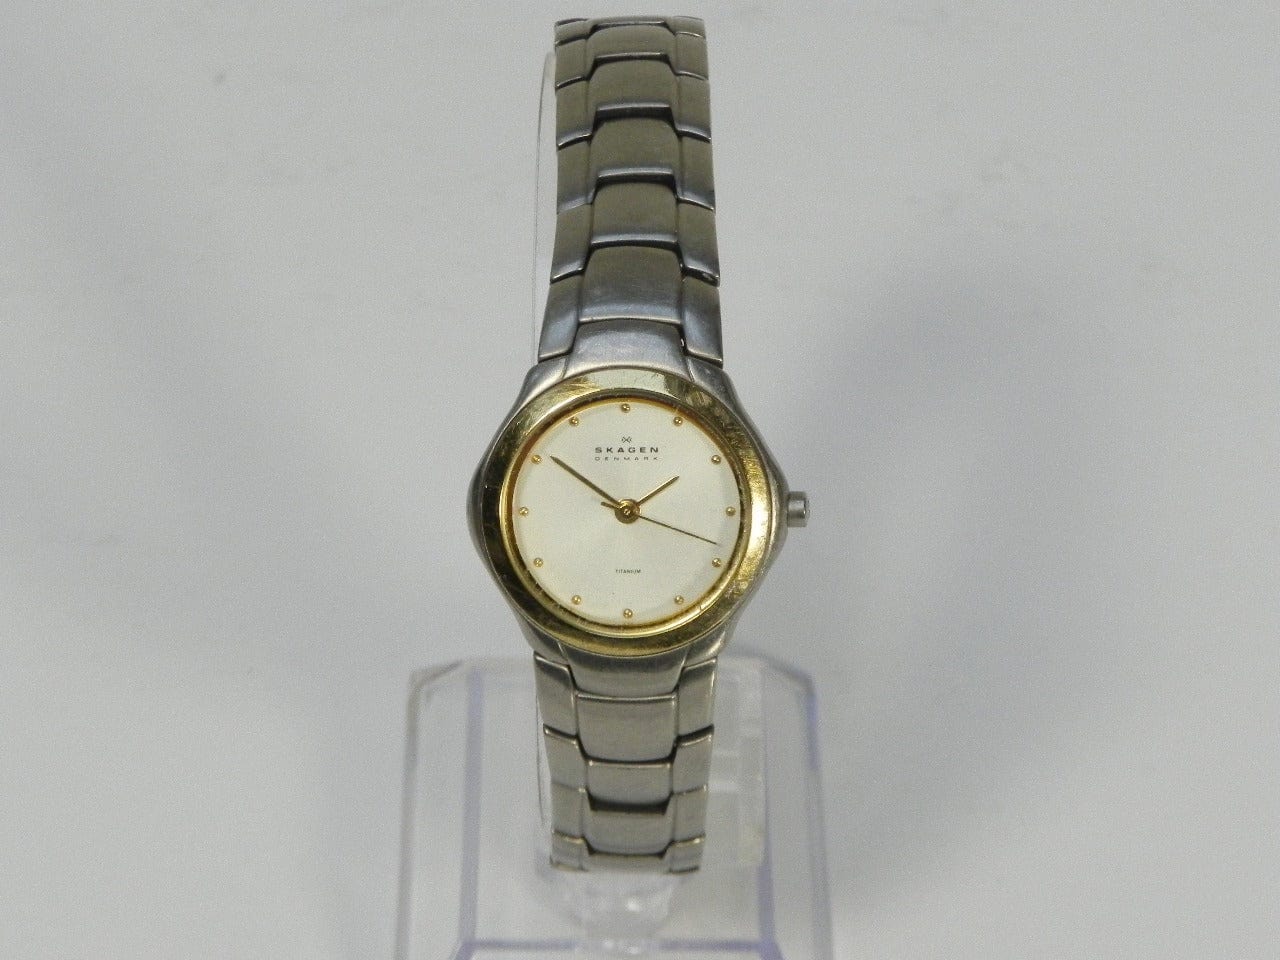 I Like Mikes Mid Century Modern Clock Skagen Women's Titanium Mixed Metals Watch with Bracelet Band